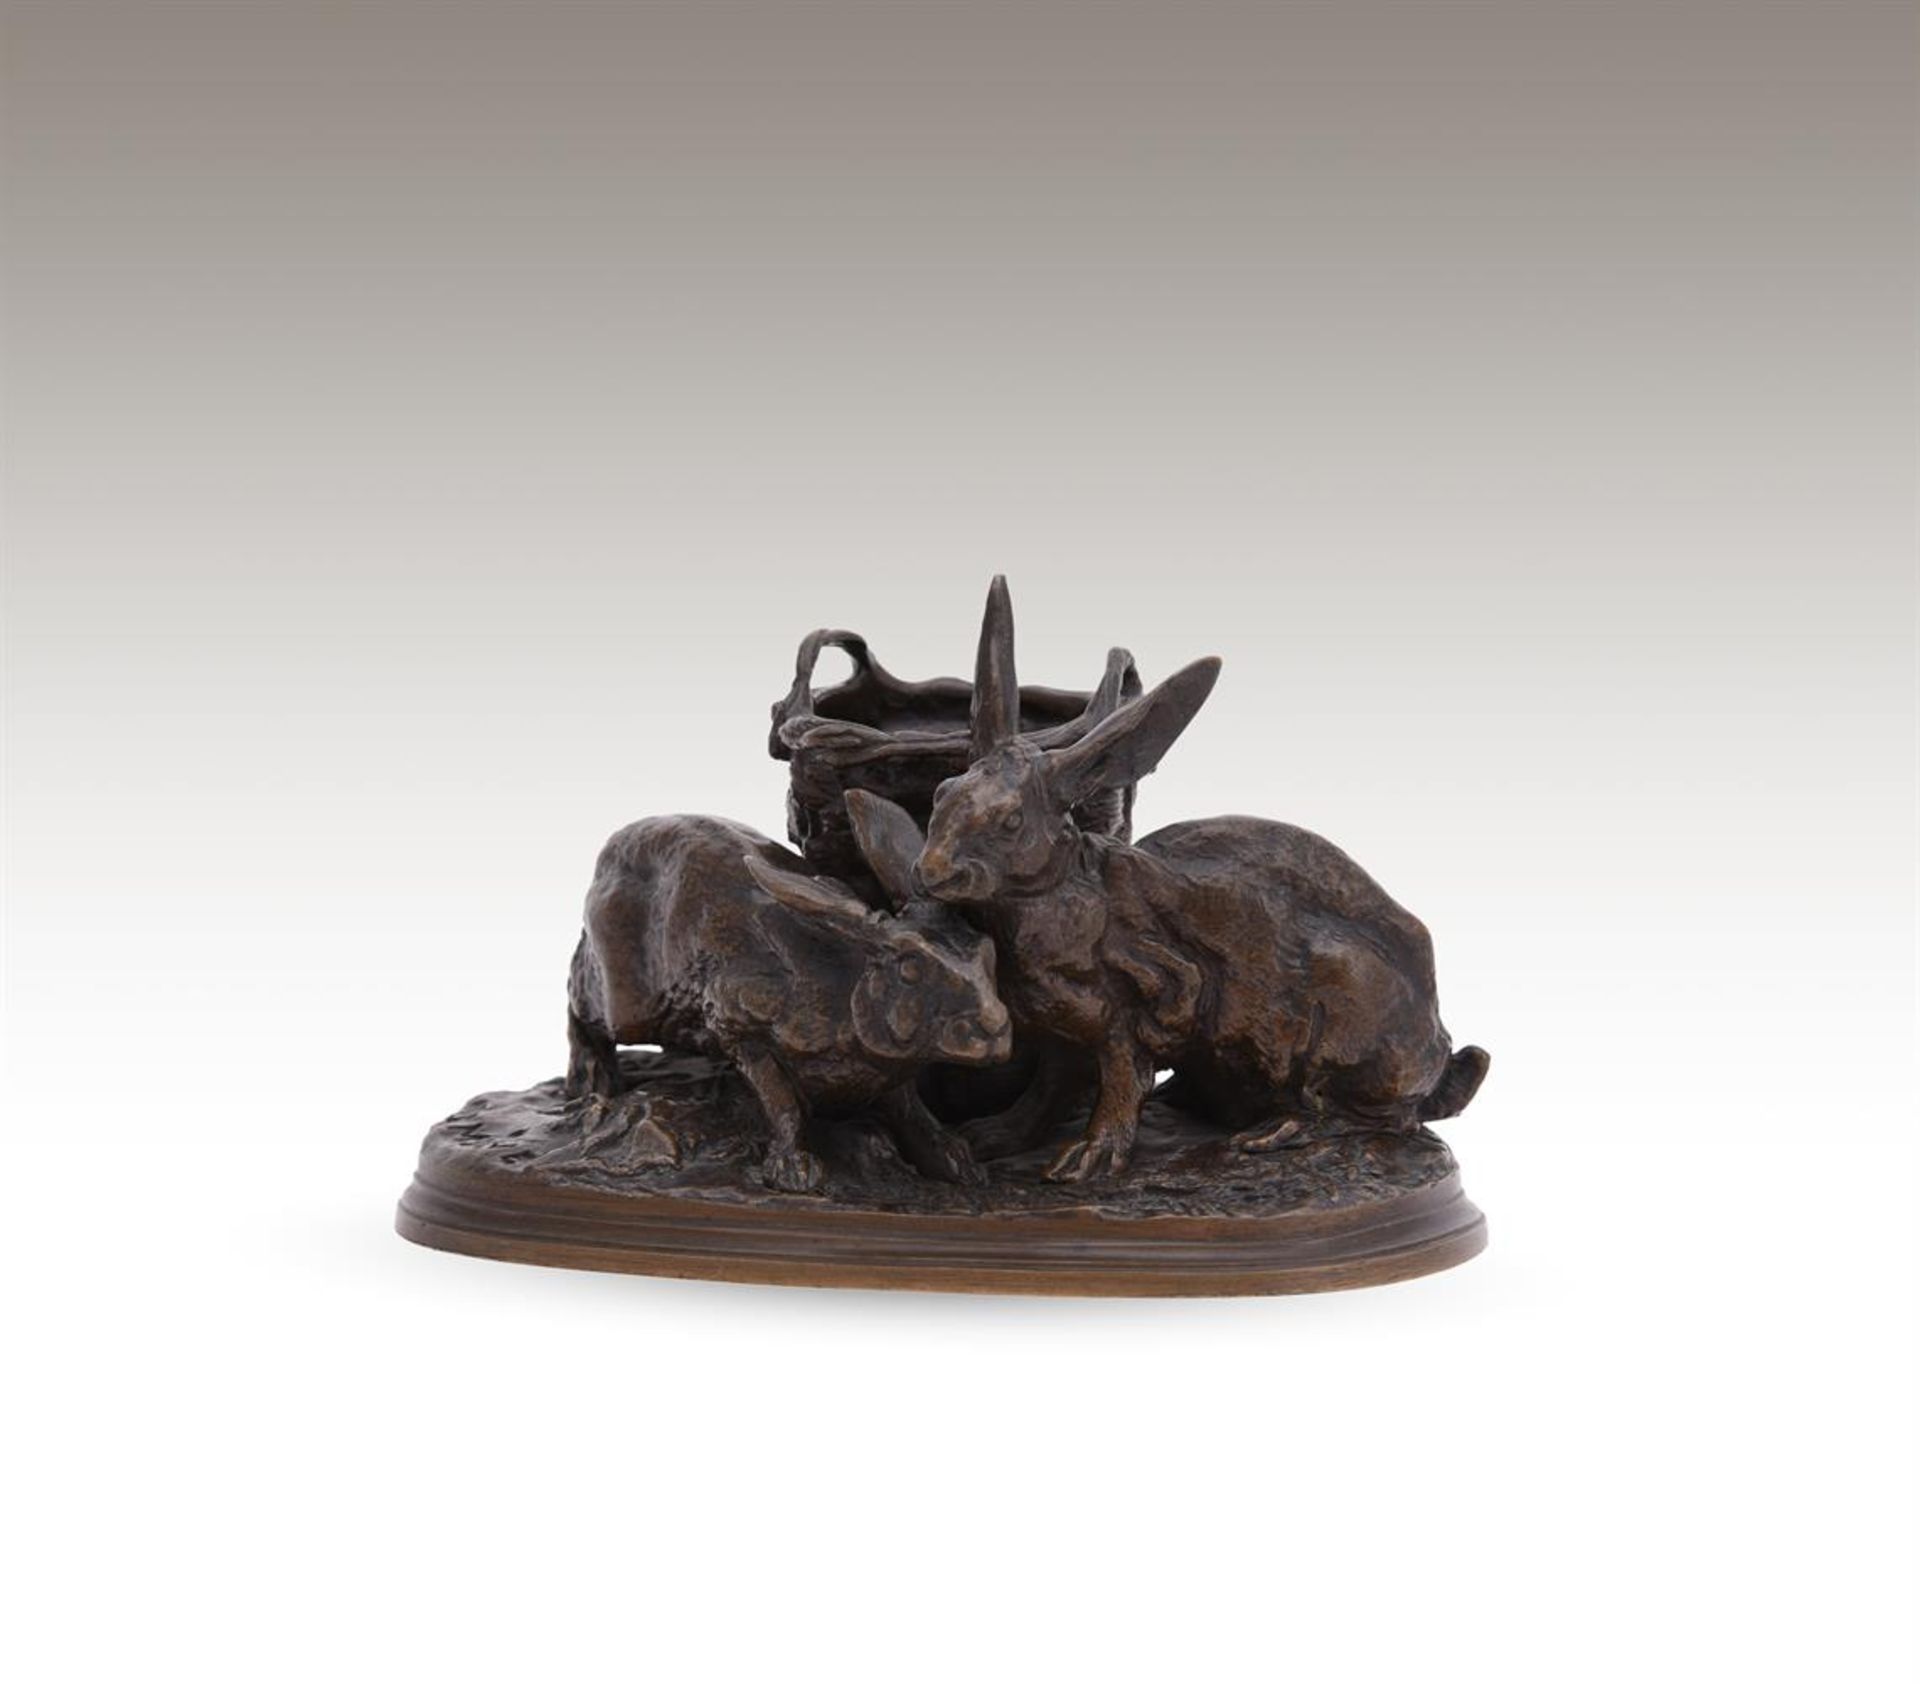 PIERRE-JULES MÊNE (FRENCH, 1810-1879), A BRONZE MODEL OF A PAIR OF RABBITS - Image 5 of 5